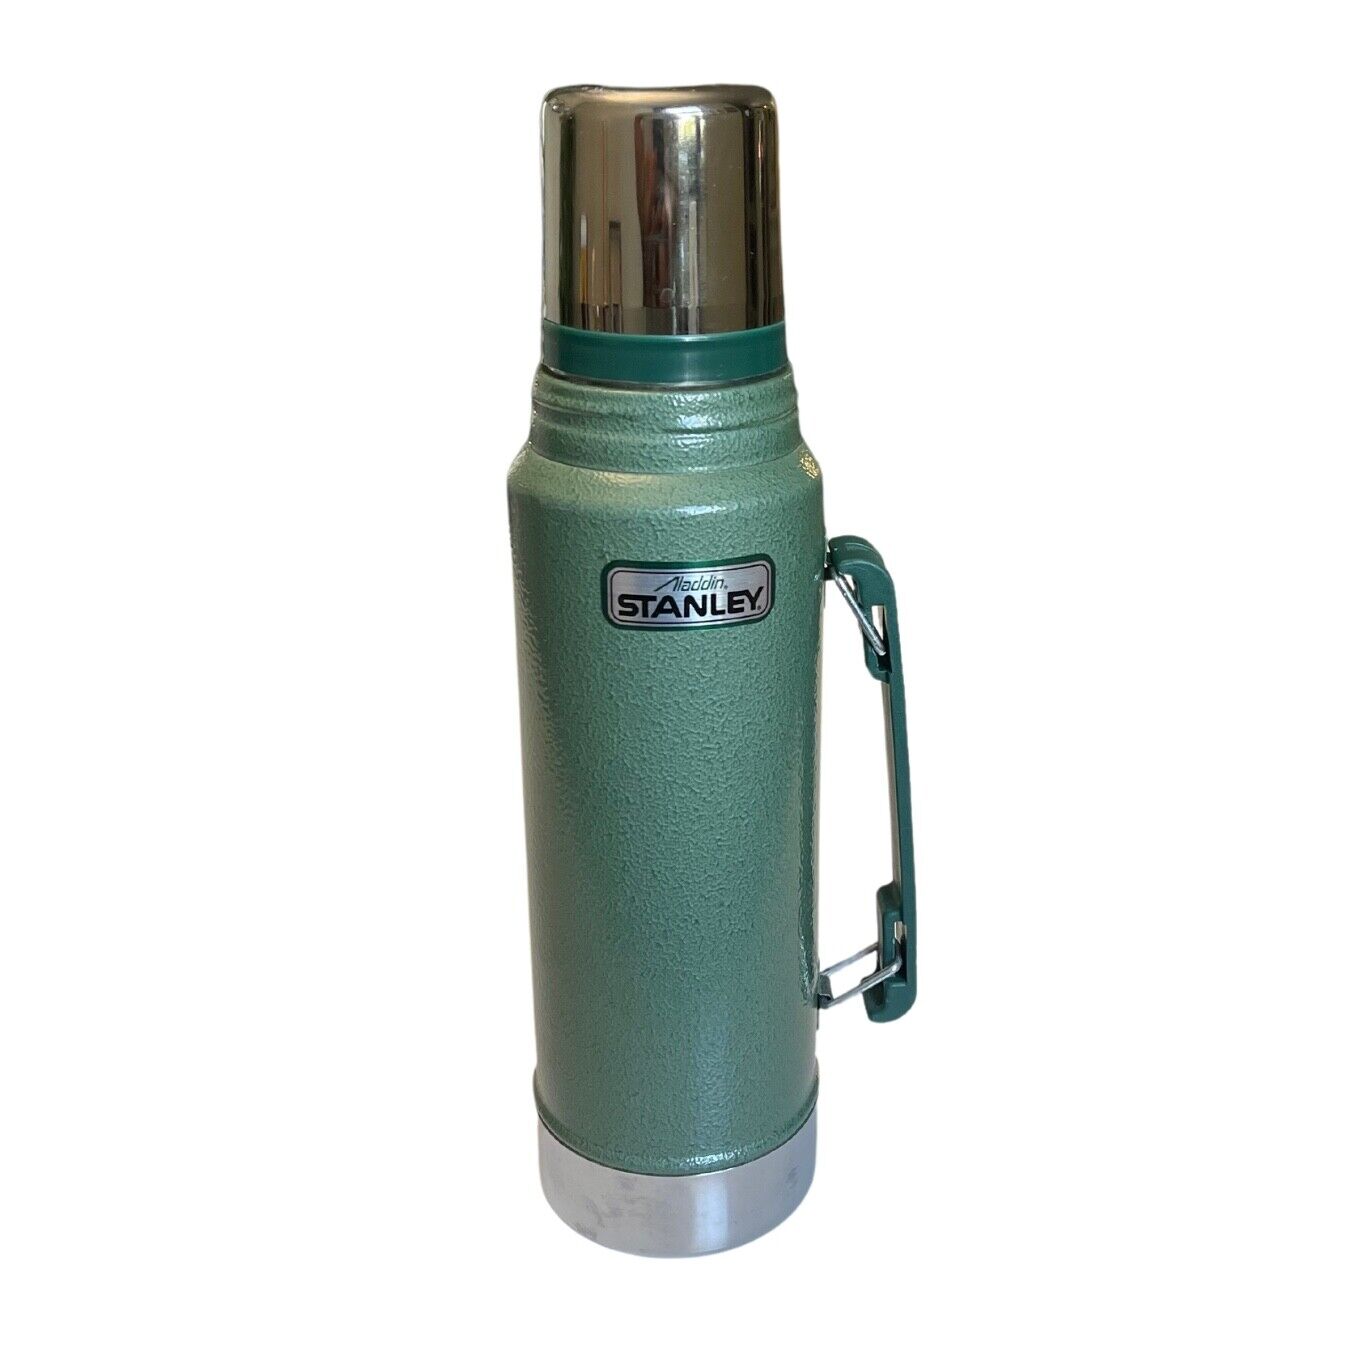 Vintage 1992 Aladdin Stanley Thermos Green Steel A-944DH Quart USA Made